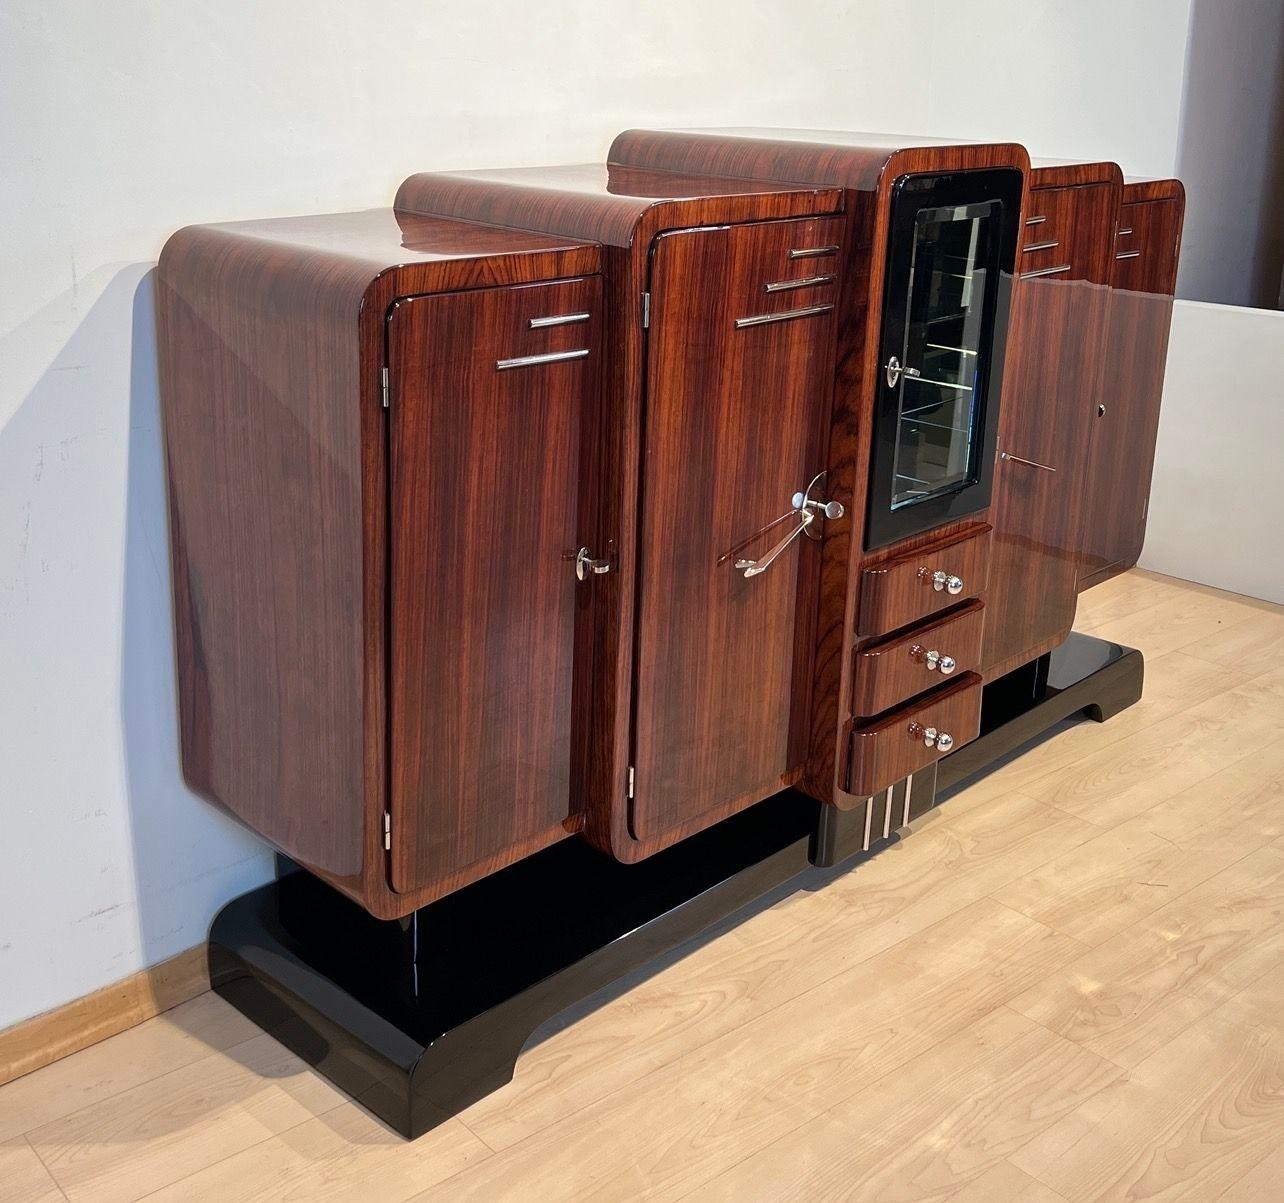 Blackened Art Deco Sideboard, Rosewood, Black Lacquer, Chrome, France circa 1925